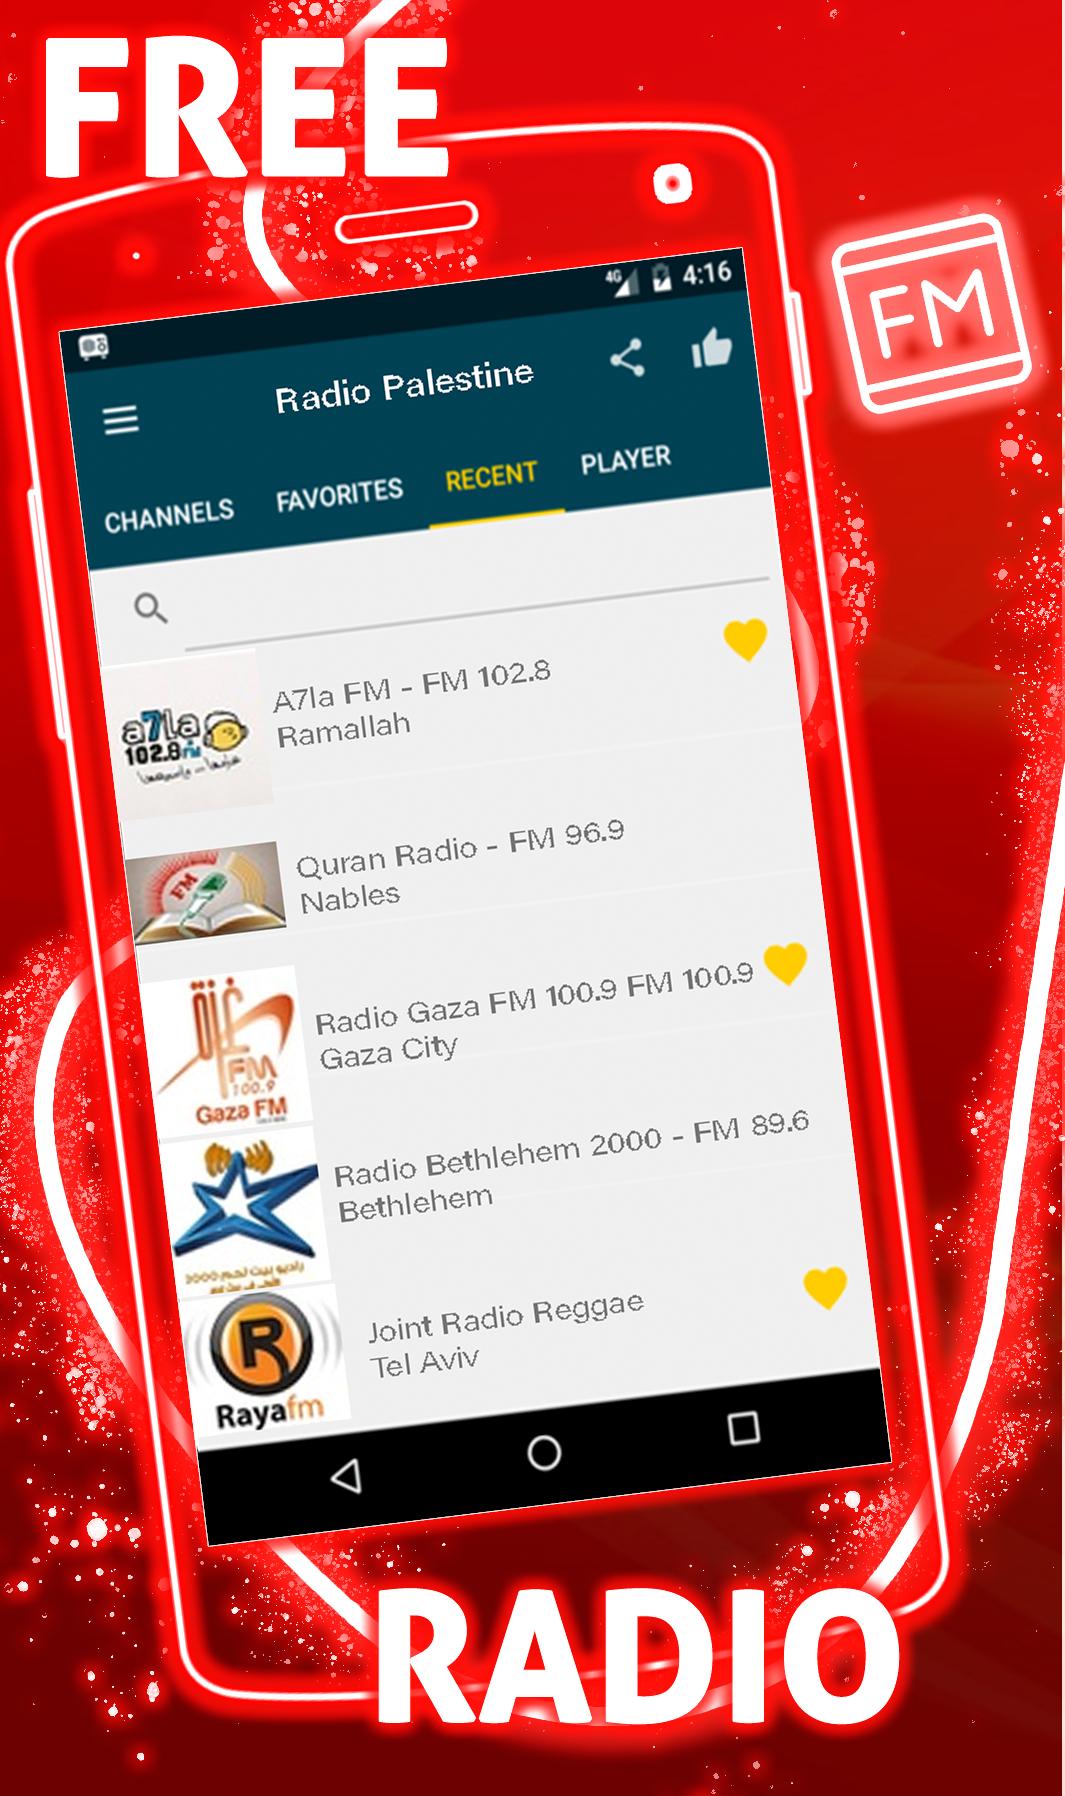 Palestina Radio Online for Android - APK Download